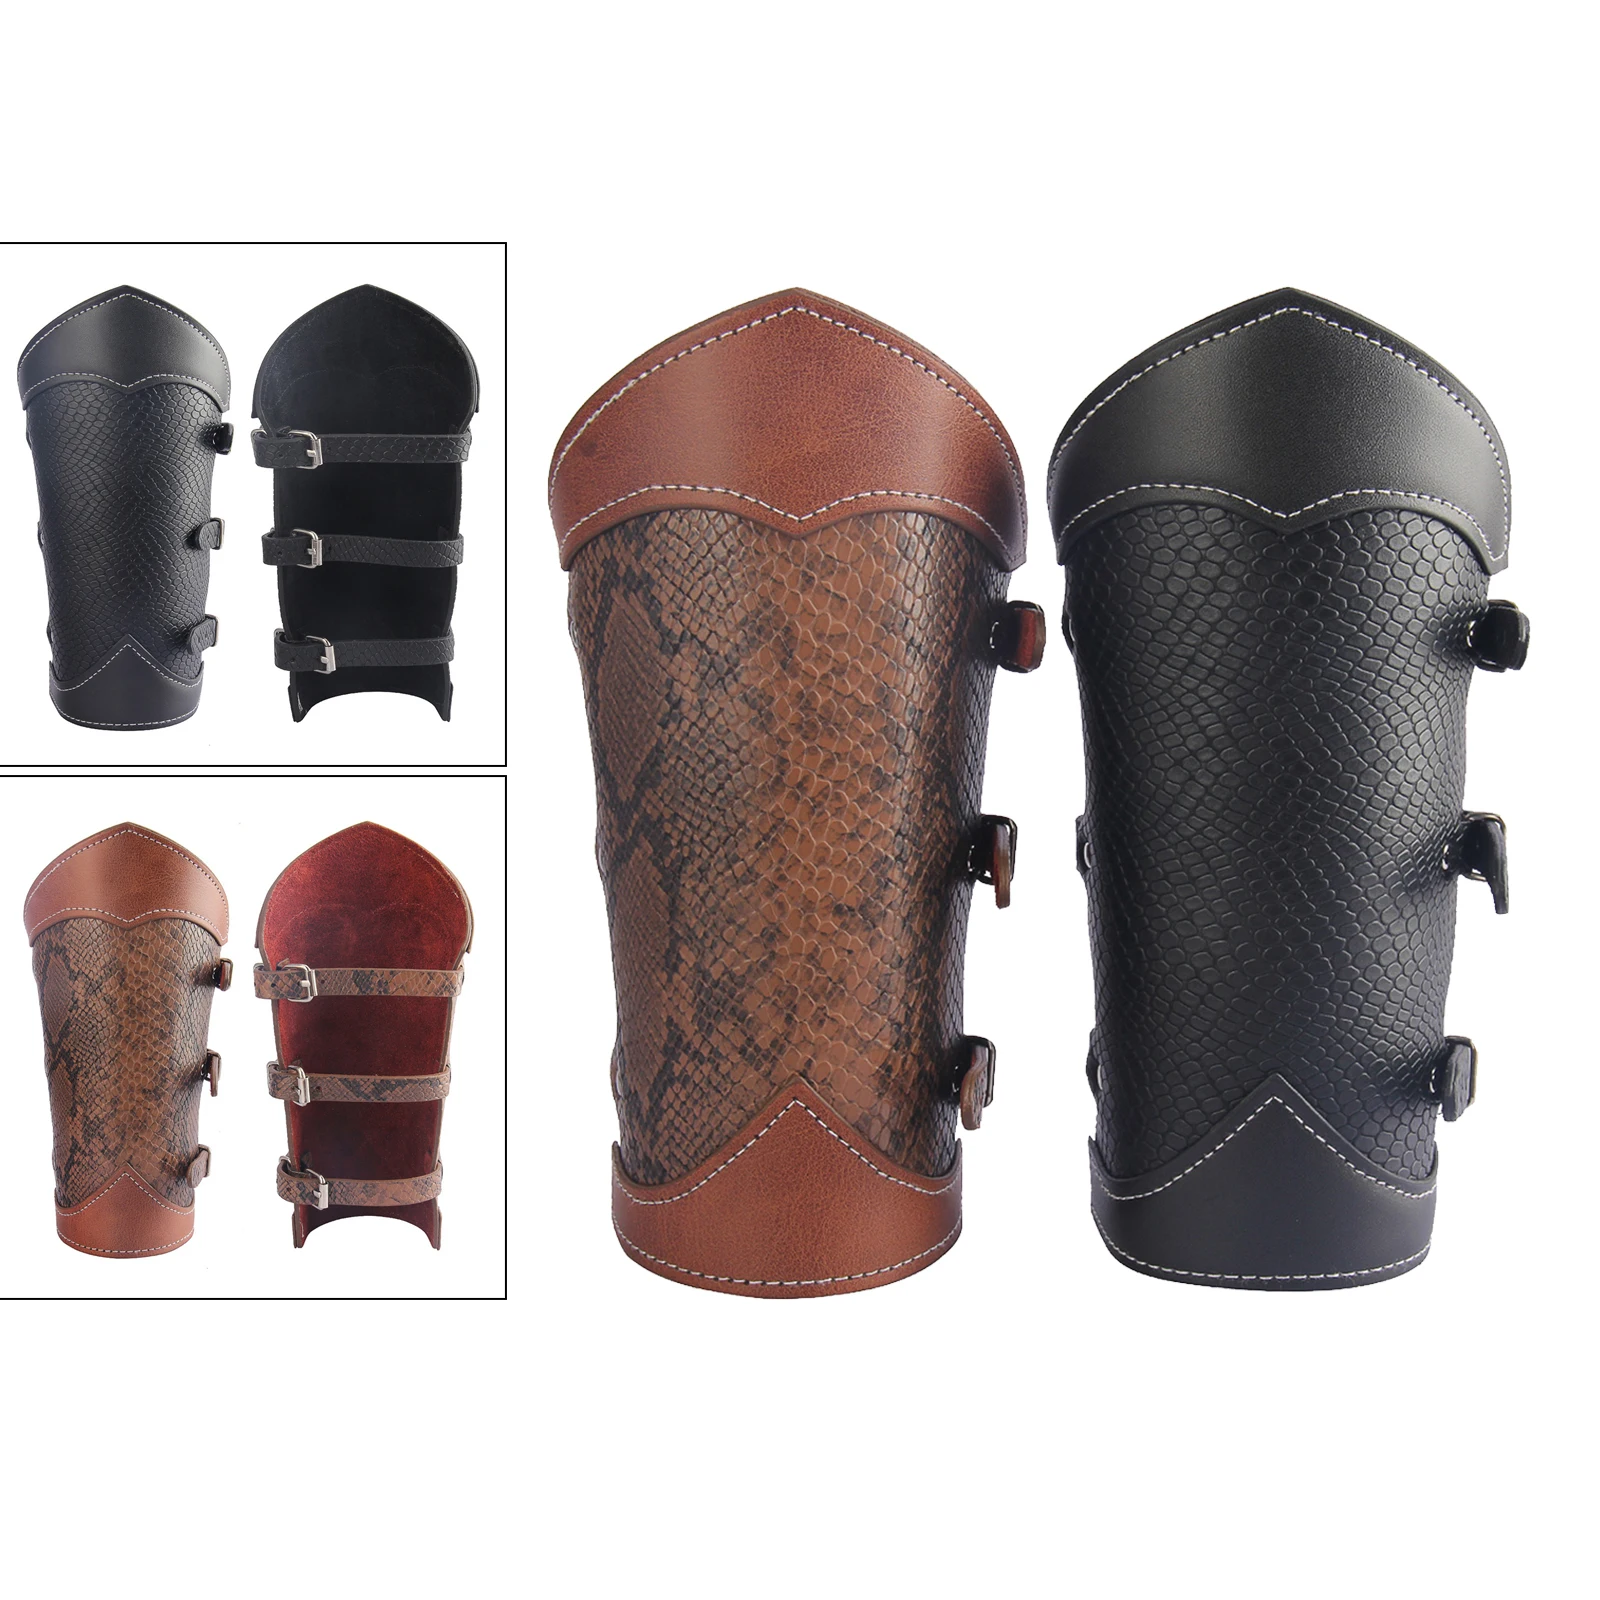 PU Leather Gauntlet Wristband Medieval Costume Bracers Wrist Guard Arm Armor Cuffs Cosplay